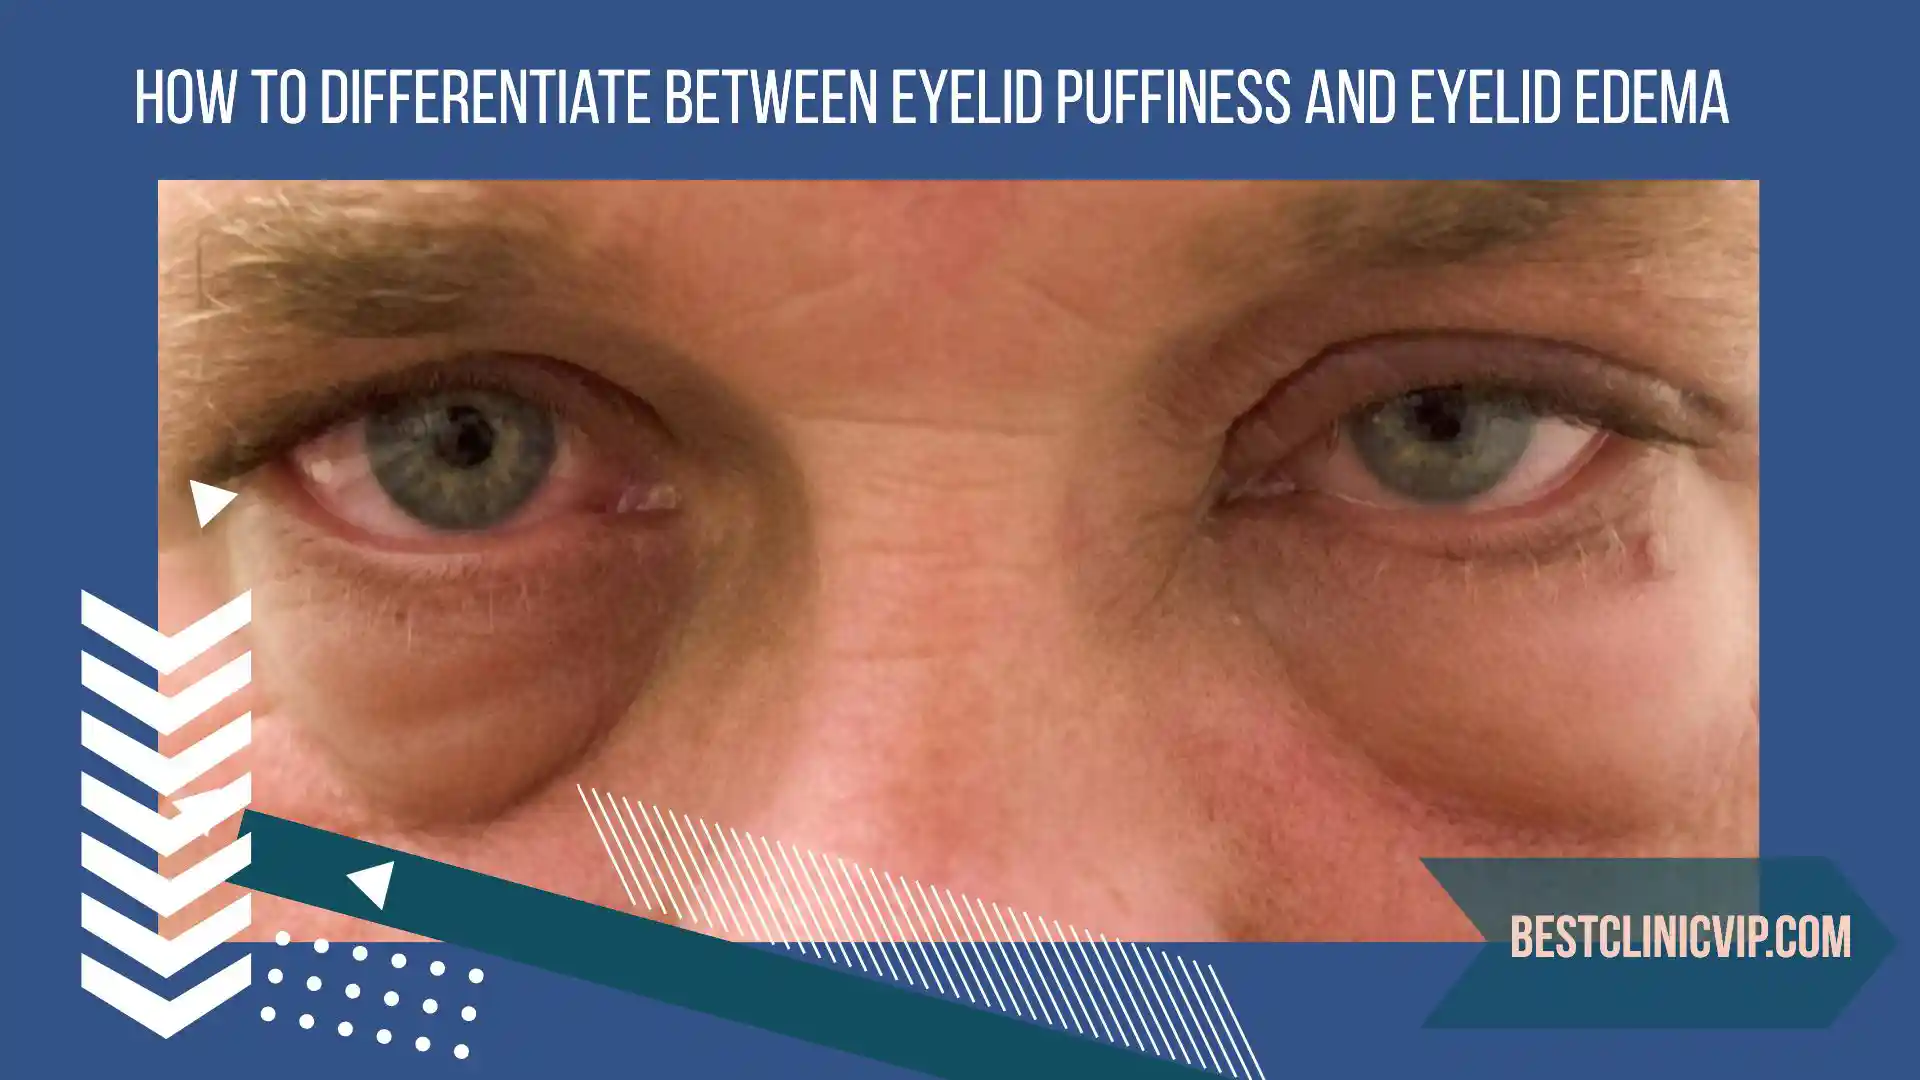 How to Differentiate Between Eyelid Puffiness and Eyelid Edema